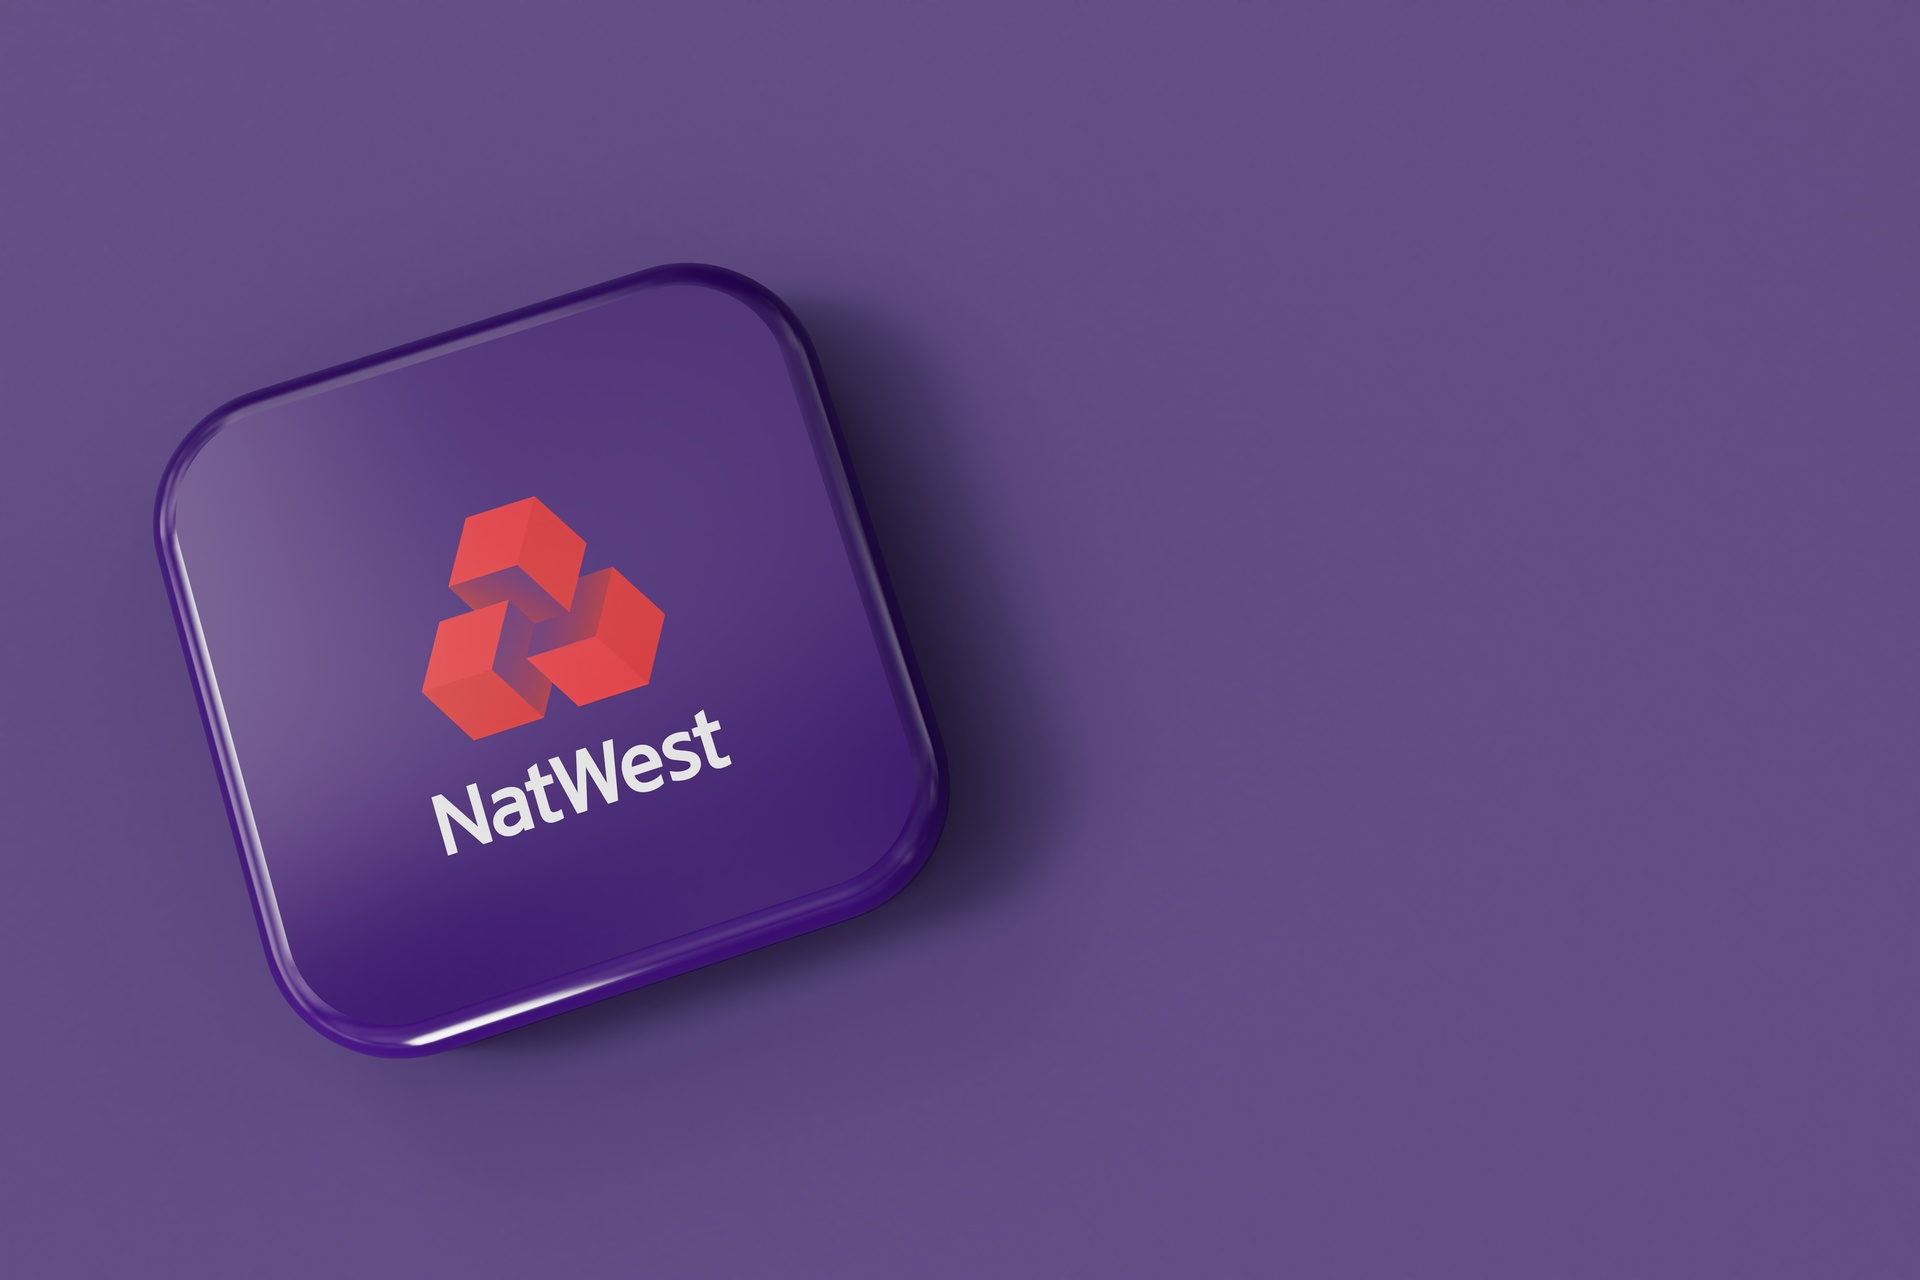 NatWest bank's logo; our conveyancing solicitors are on NatWest bank's panel, and can help with your NatWest purchase.